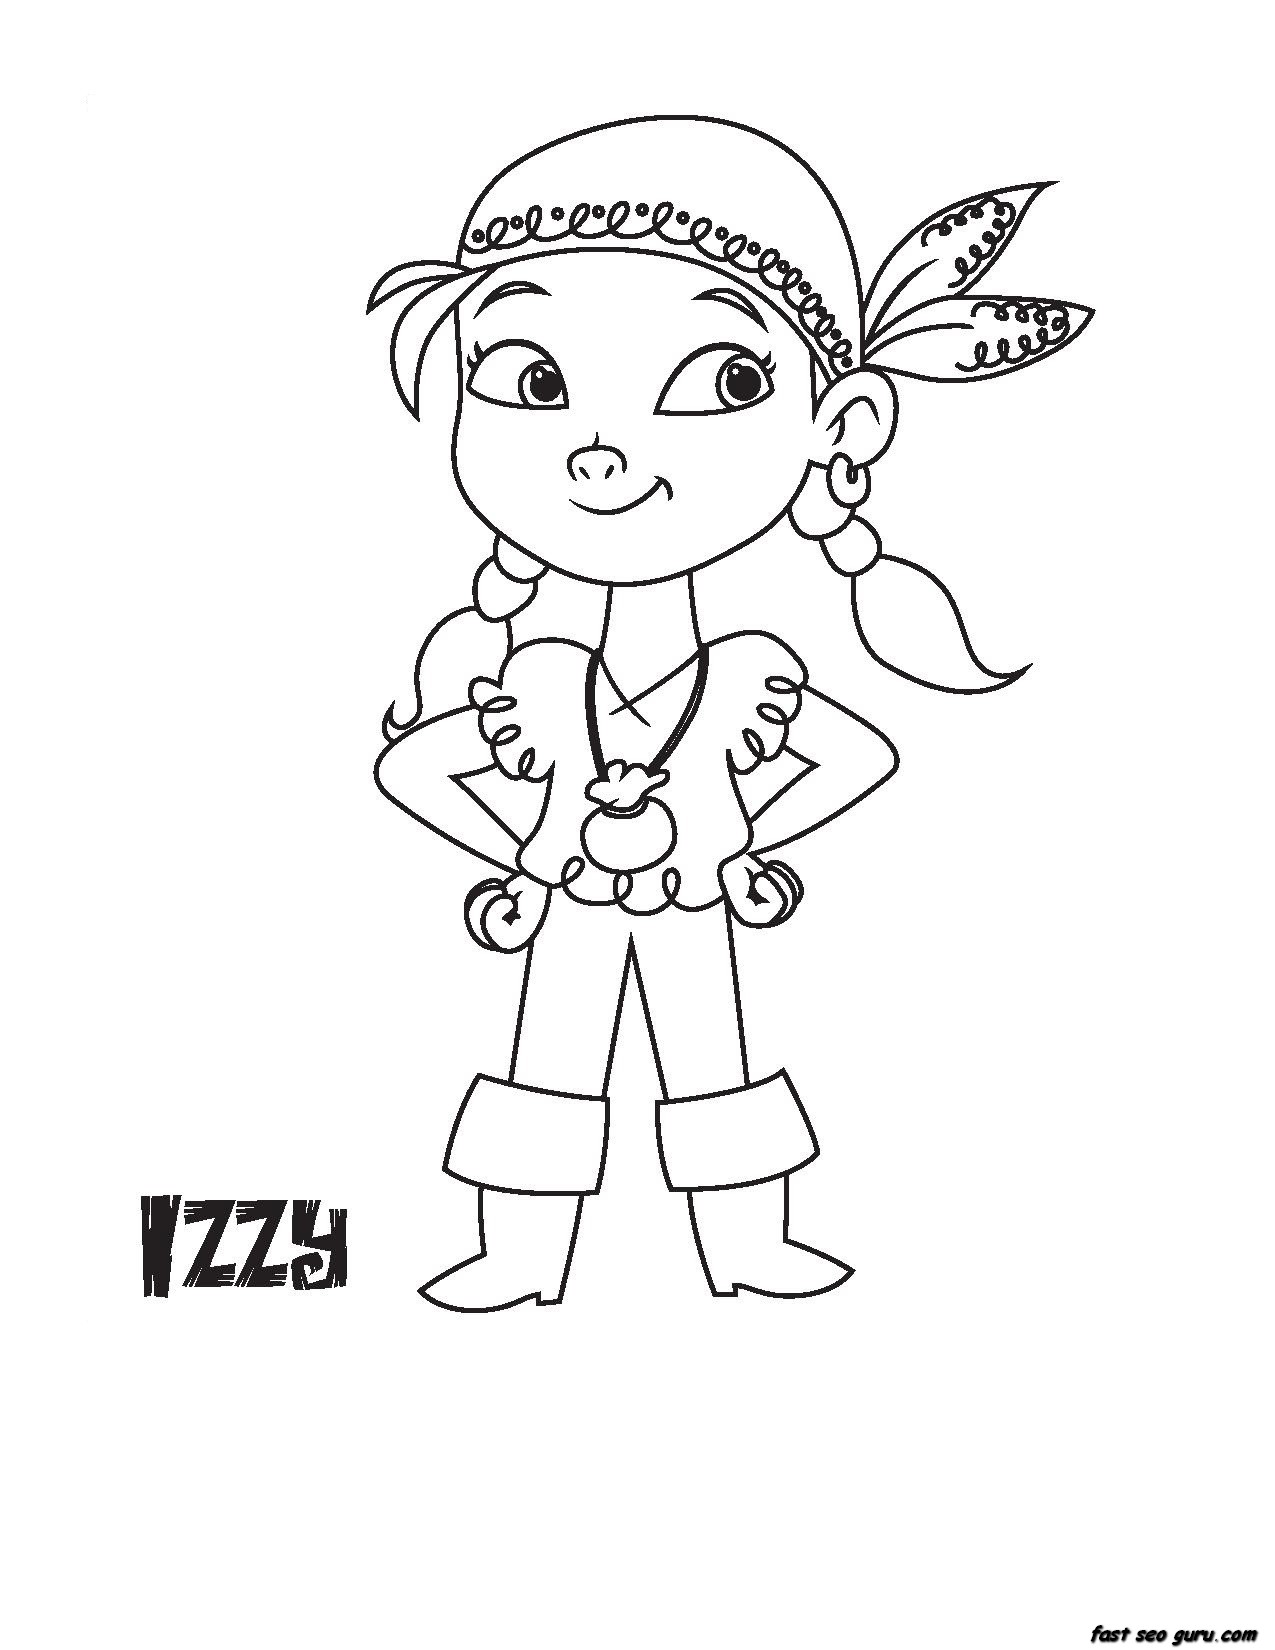 Printable Disney Junior Izzy coloring book pages